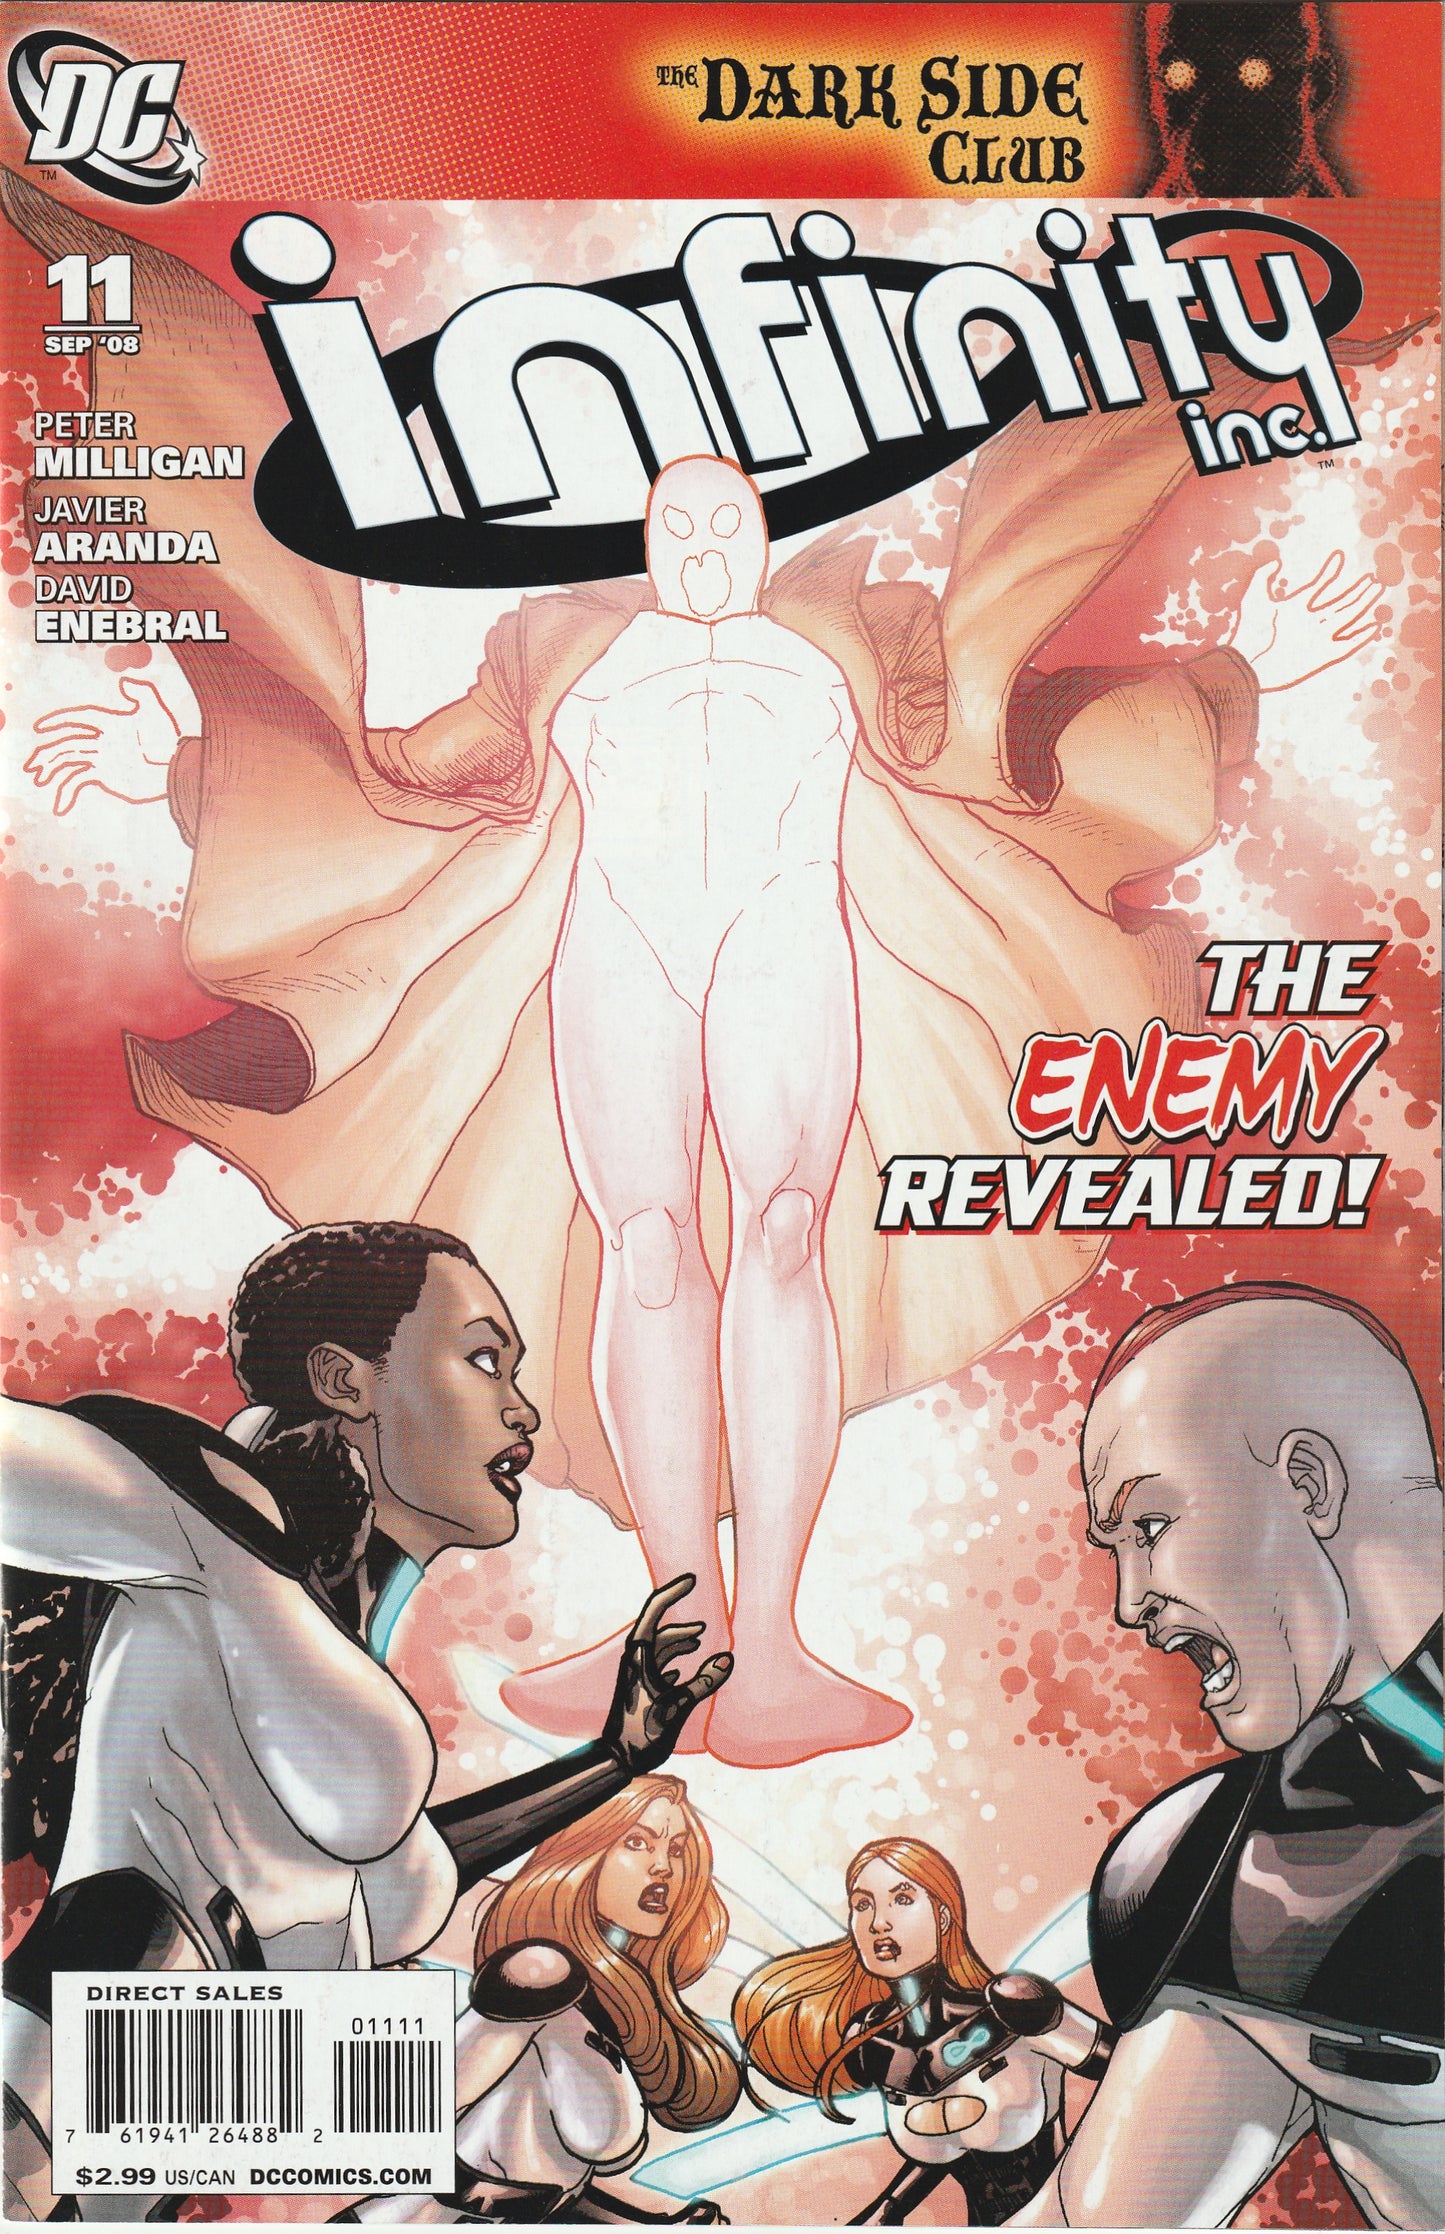 Infinity Inc. (2007-2008) - Complete 12 issue series